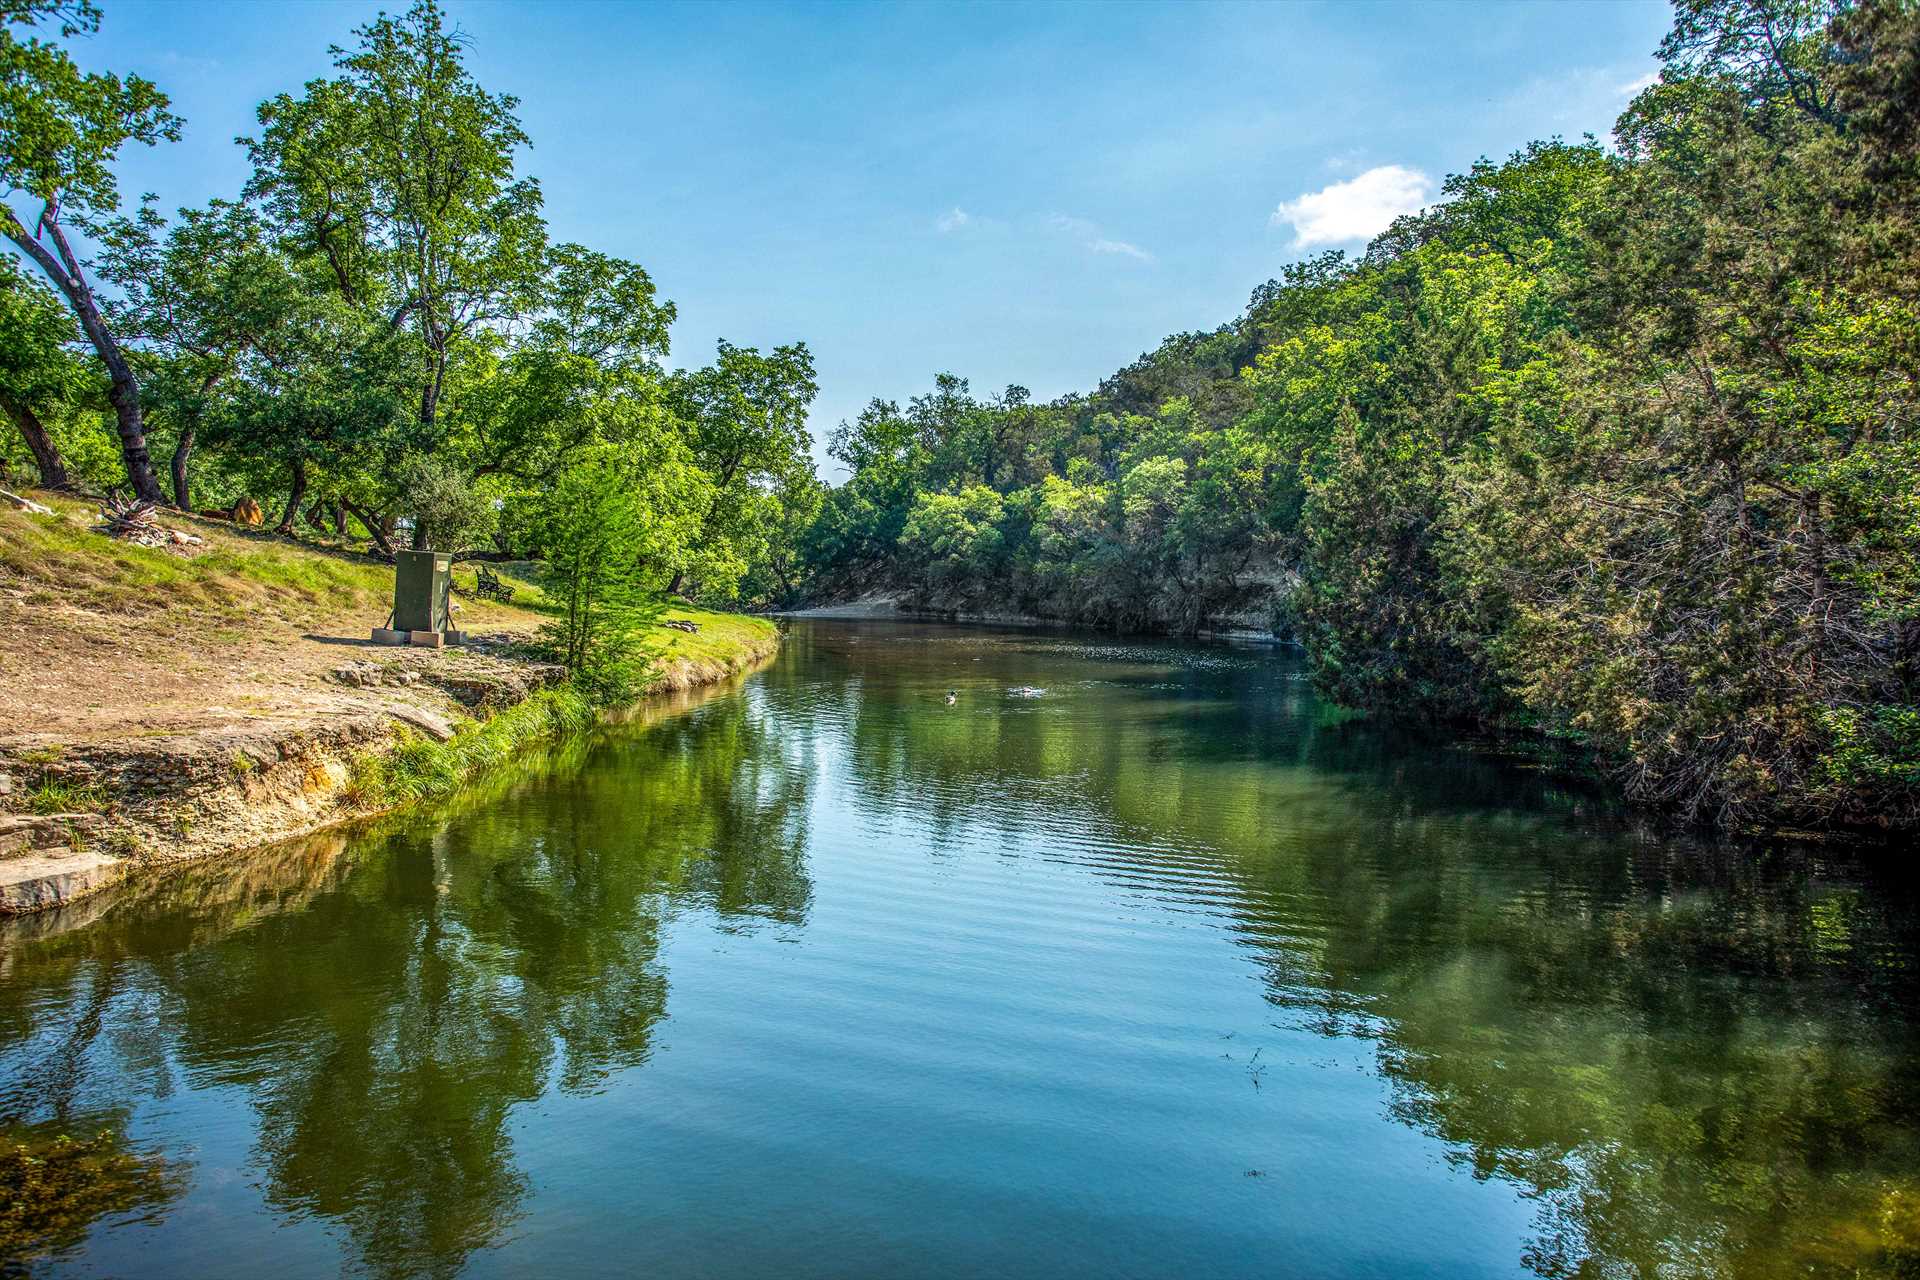                                                 Nearby Fall Creek, with its tree-lined shores and great big Hill Country skies, is a great place to fish, watch wildlife, and stargaze!